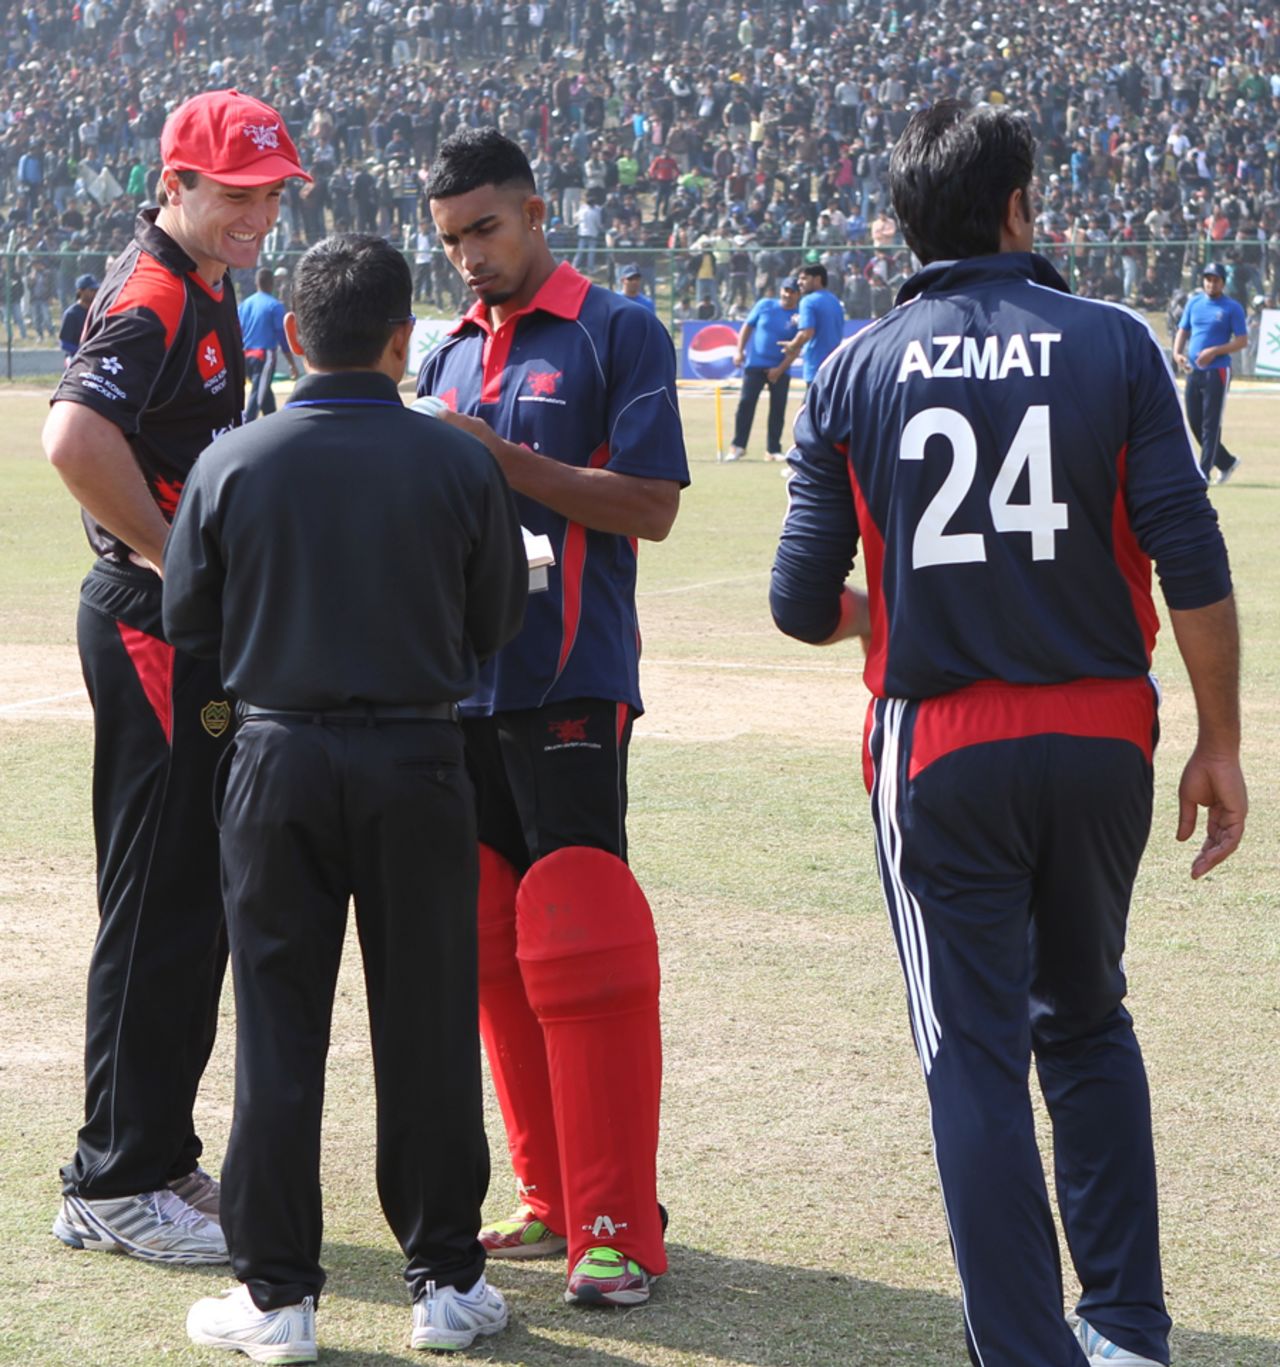 Jamie Atkinson and Irfan Ahmed select the match ball before the start of play against Kuwait at the ACC Twenty20 Cup 2011 in Kathmandu